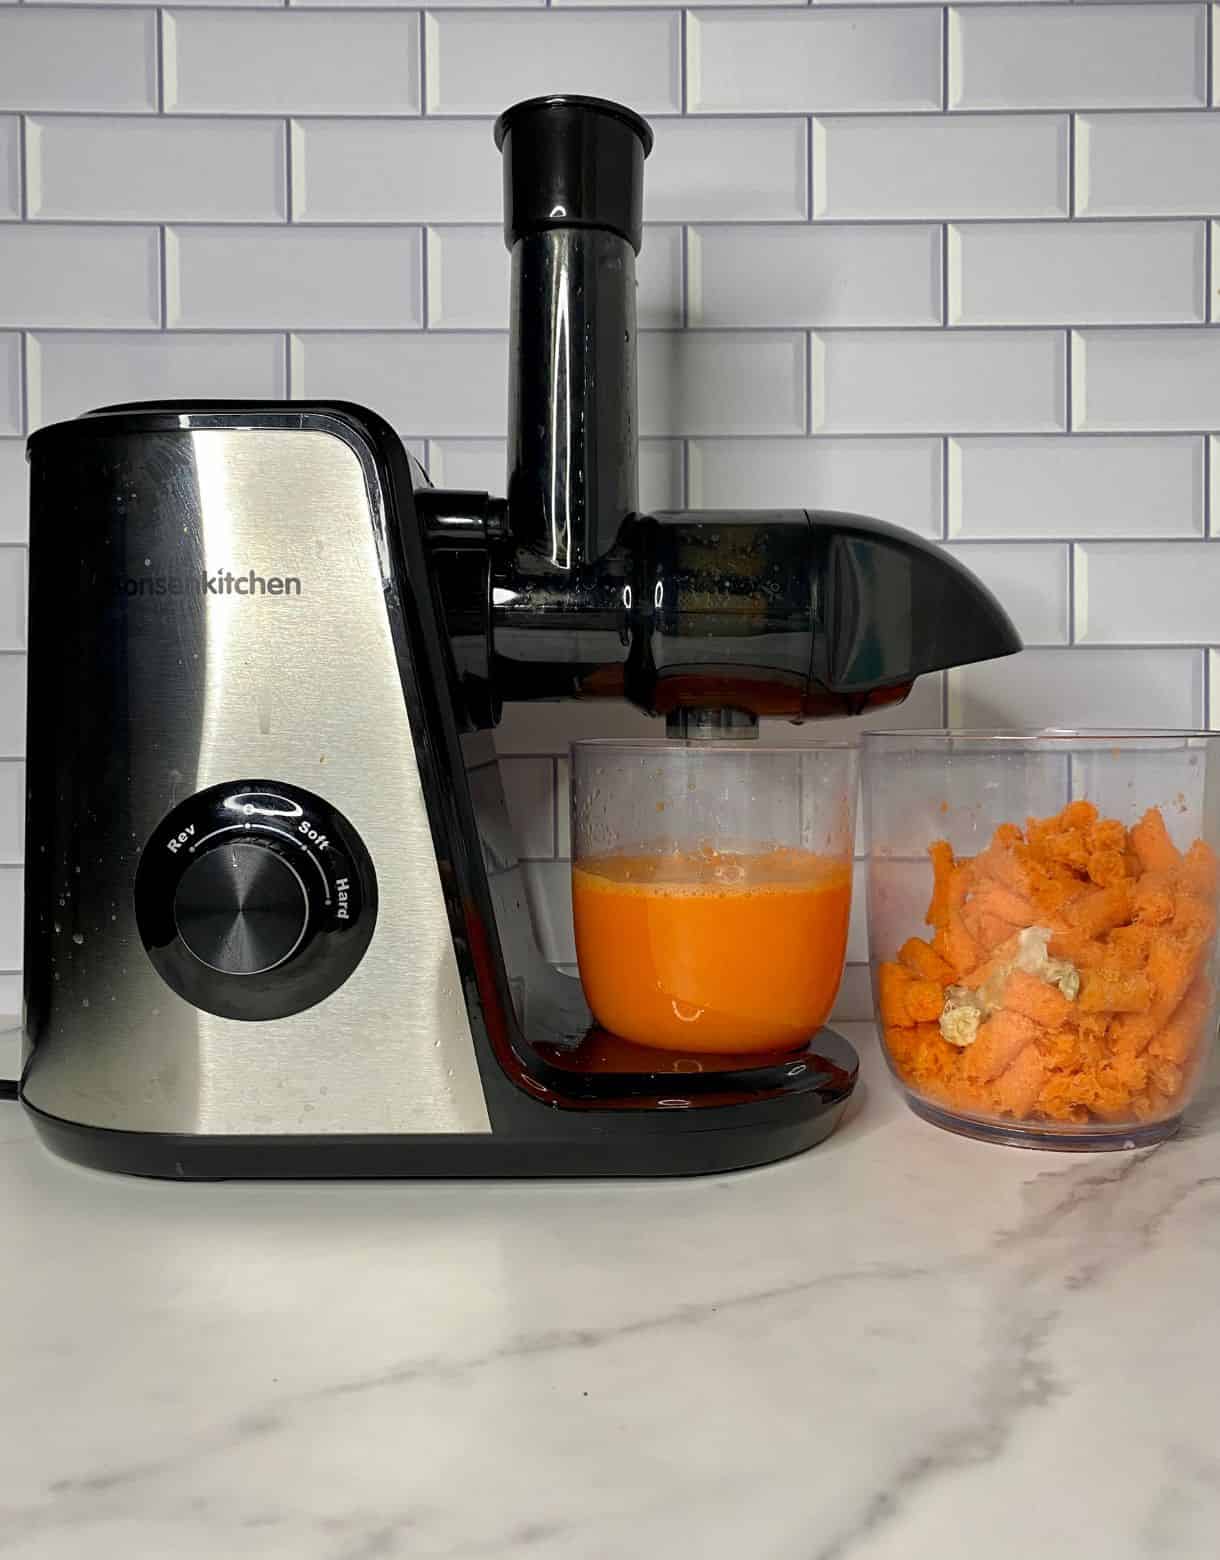 Juicer with Carrot Orange Ginger Juice and Pulp